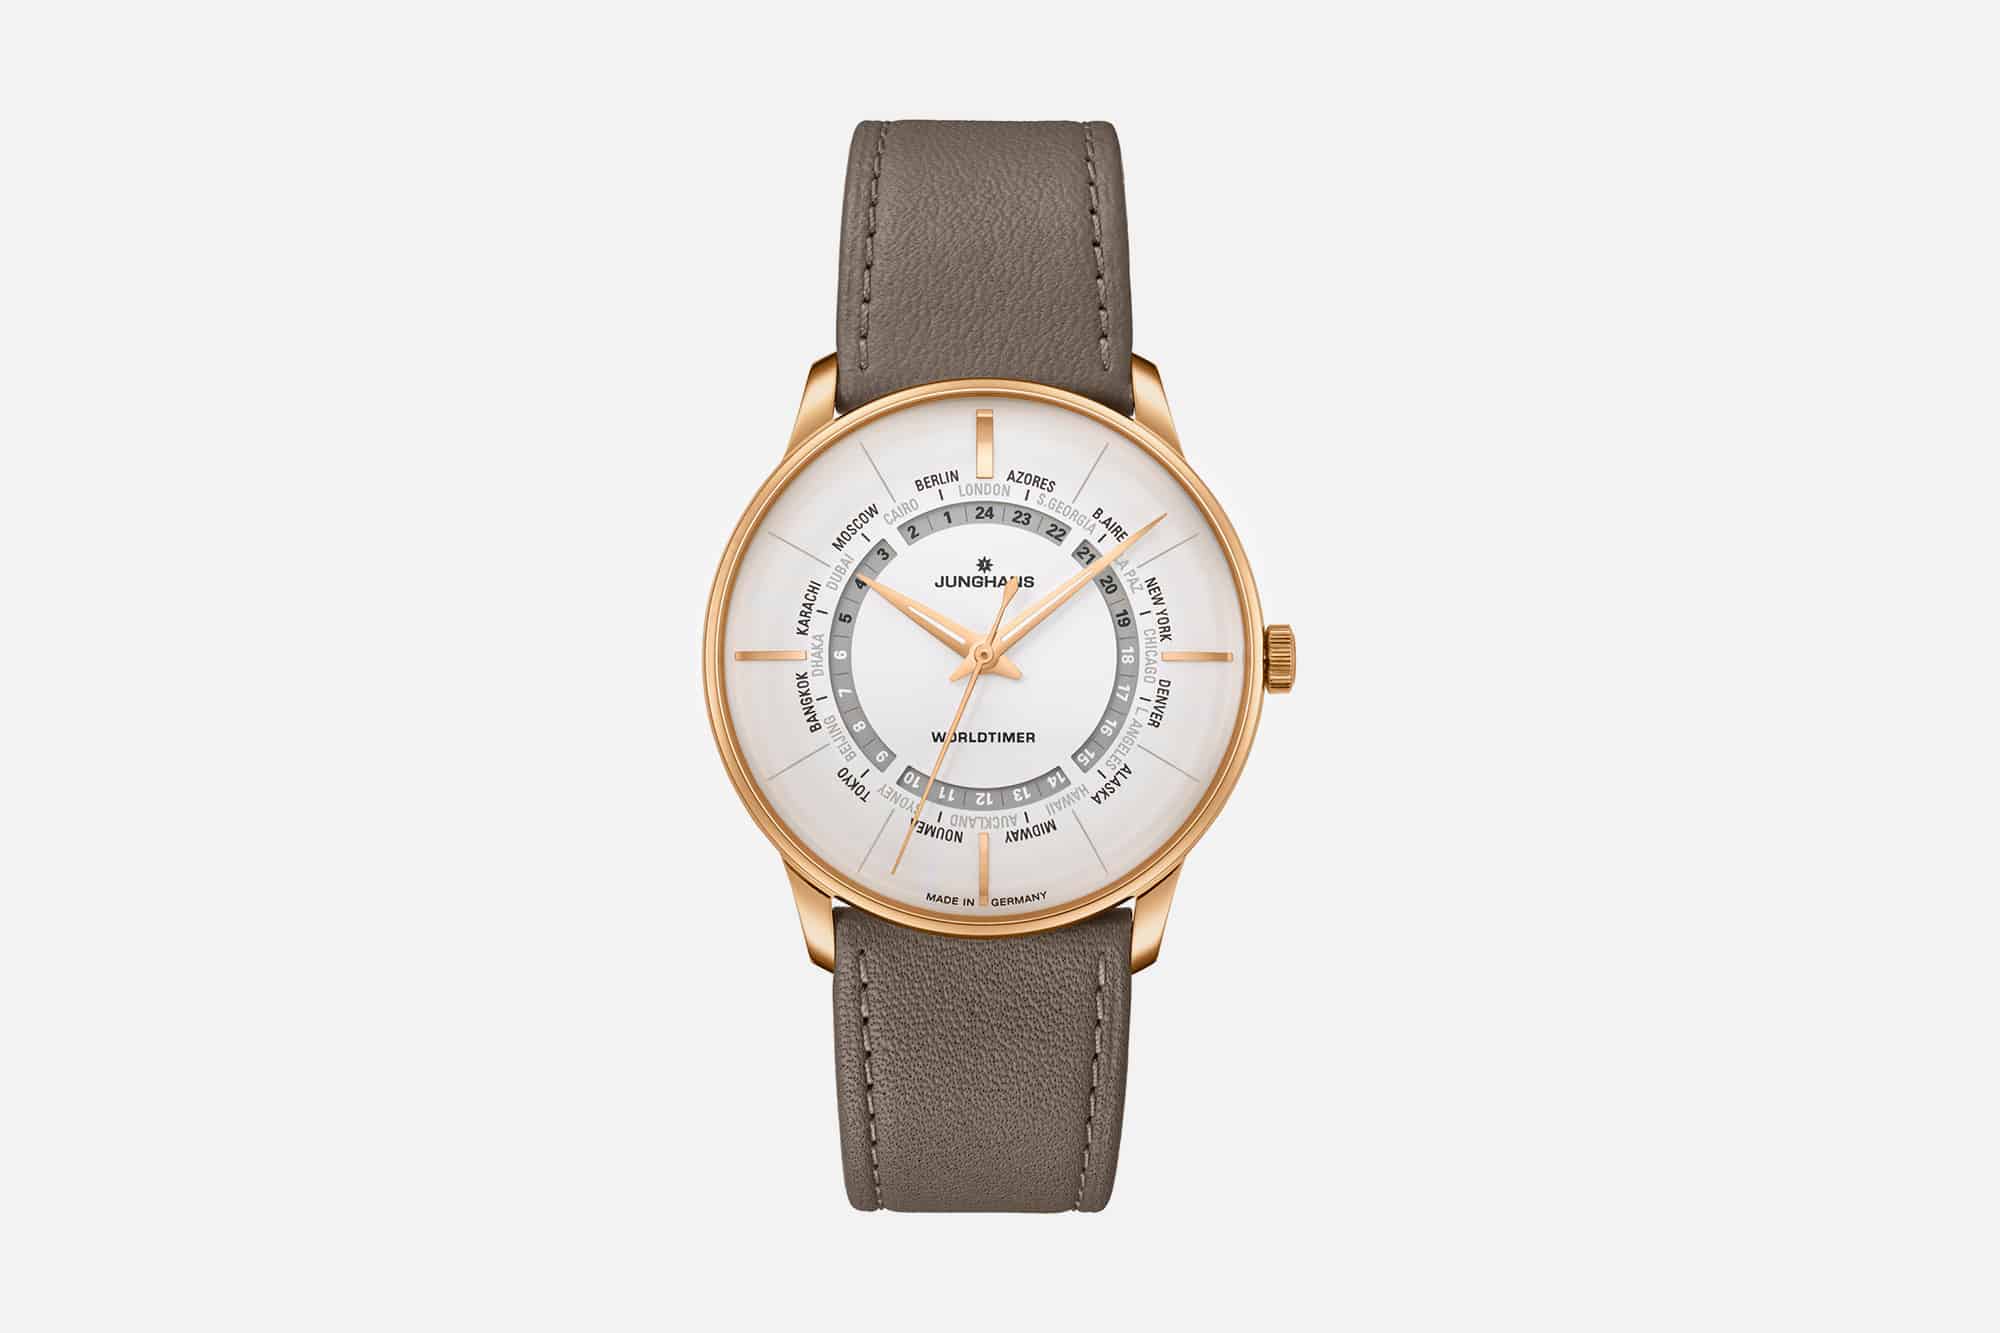 Introducing the Junghans Meister Worldtimer